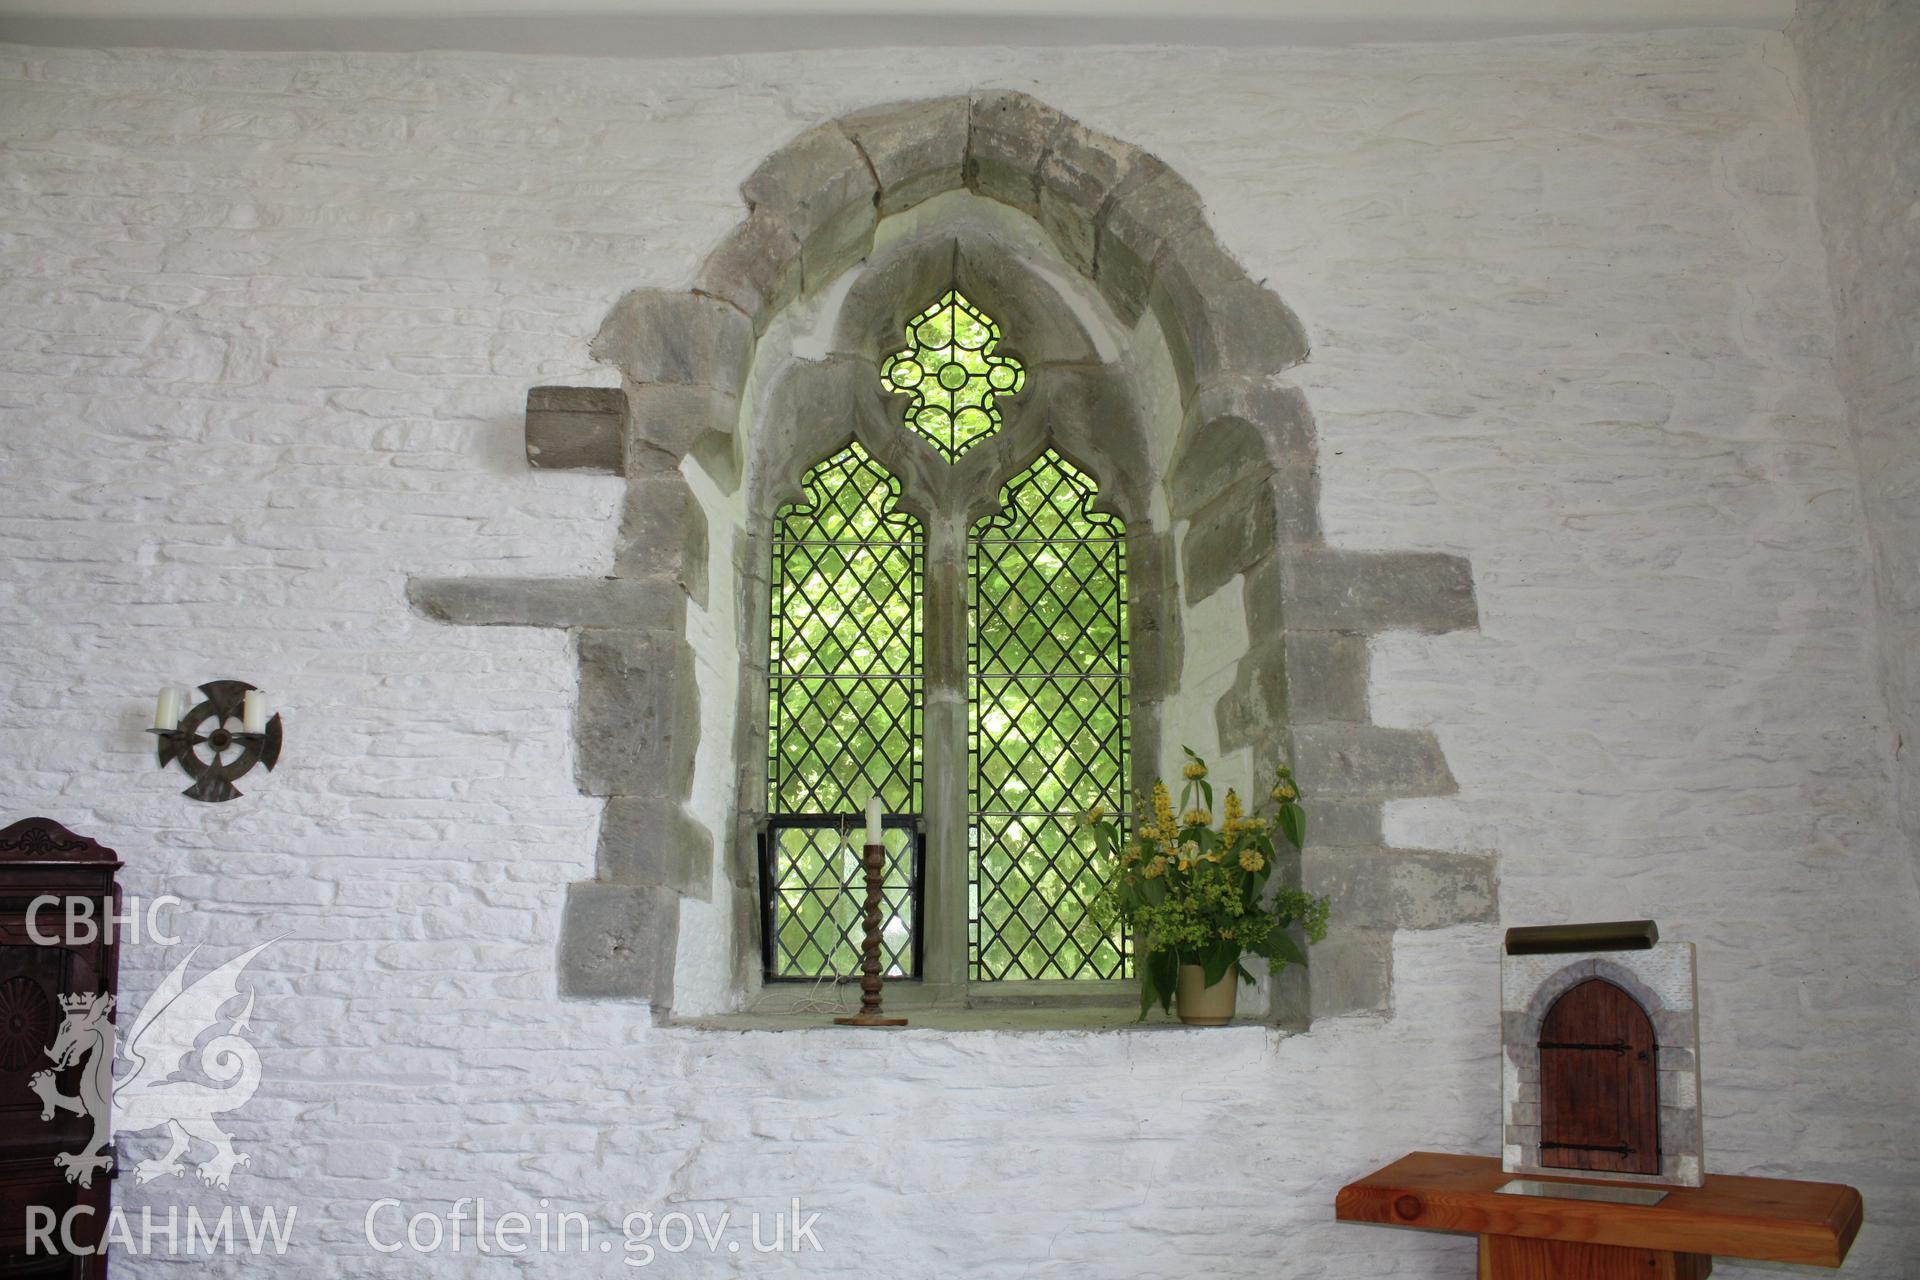 St Mary's Church, Pilleth. Interior view of the chancel window.